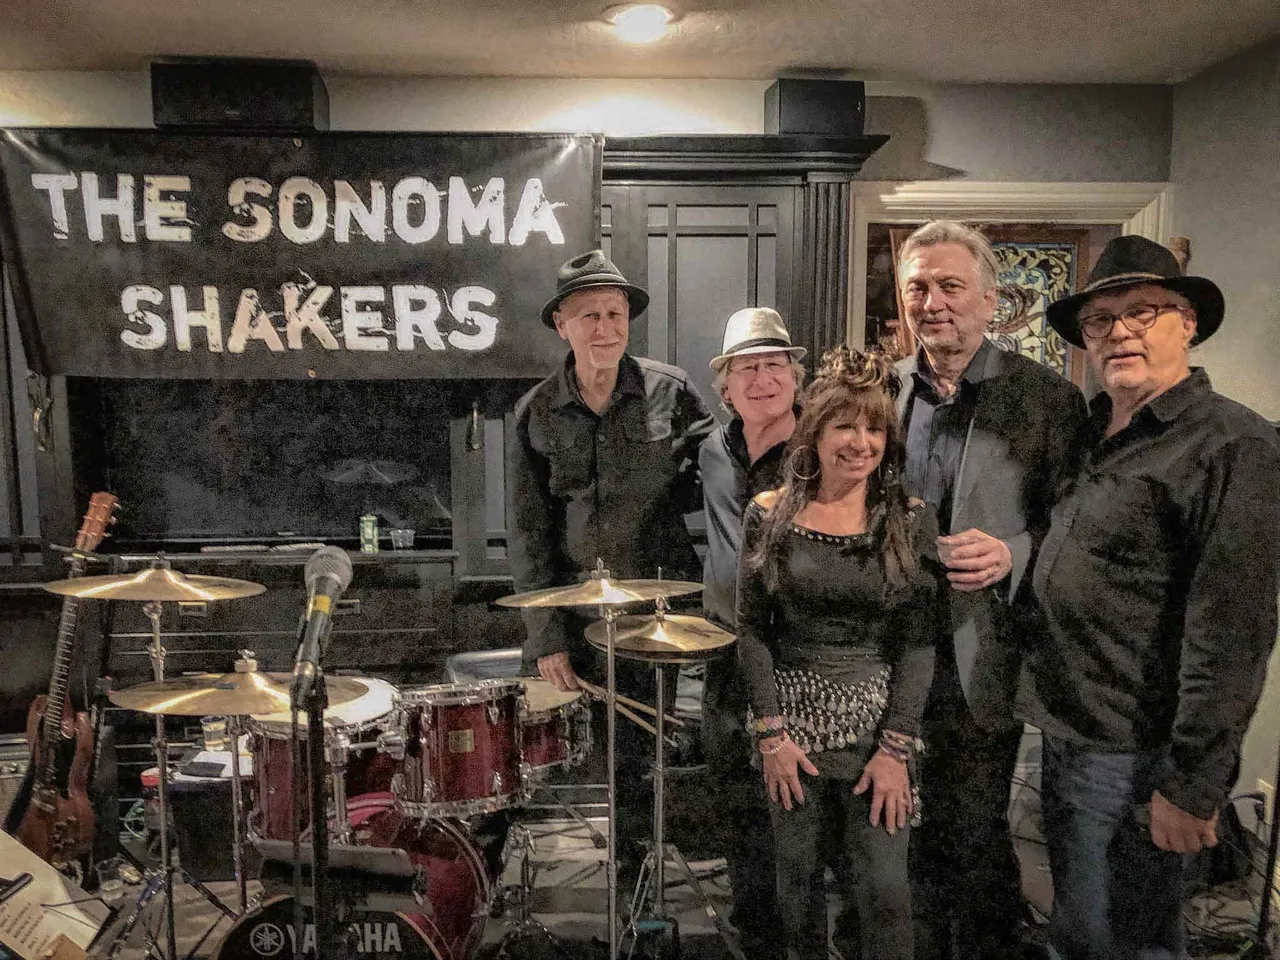 The Sonoma Shakers